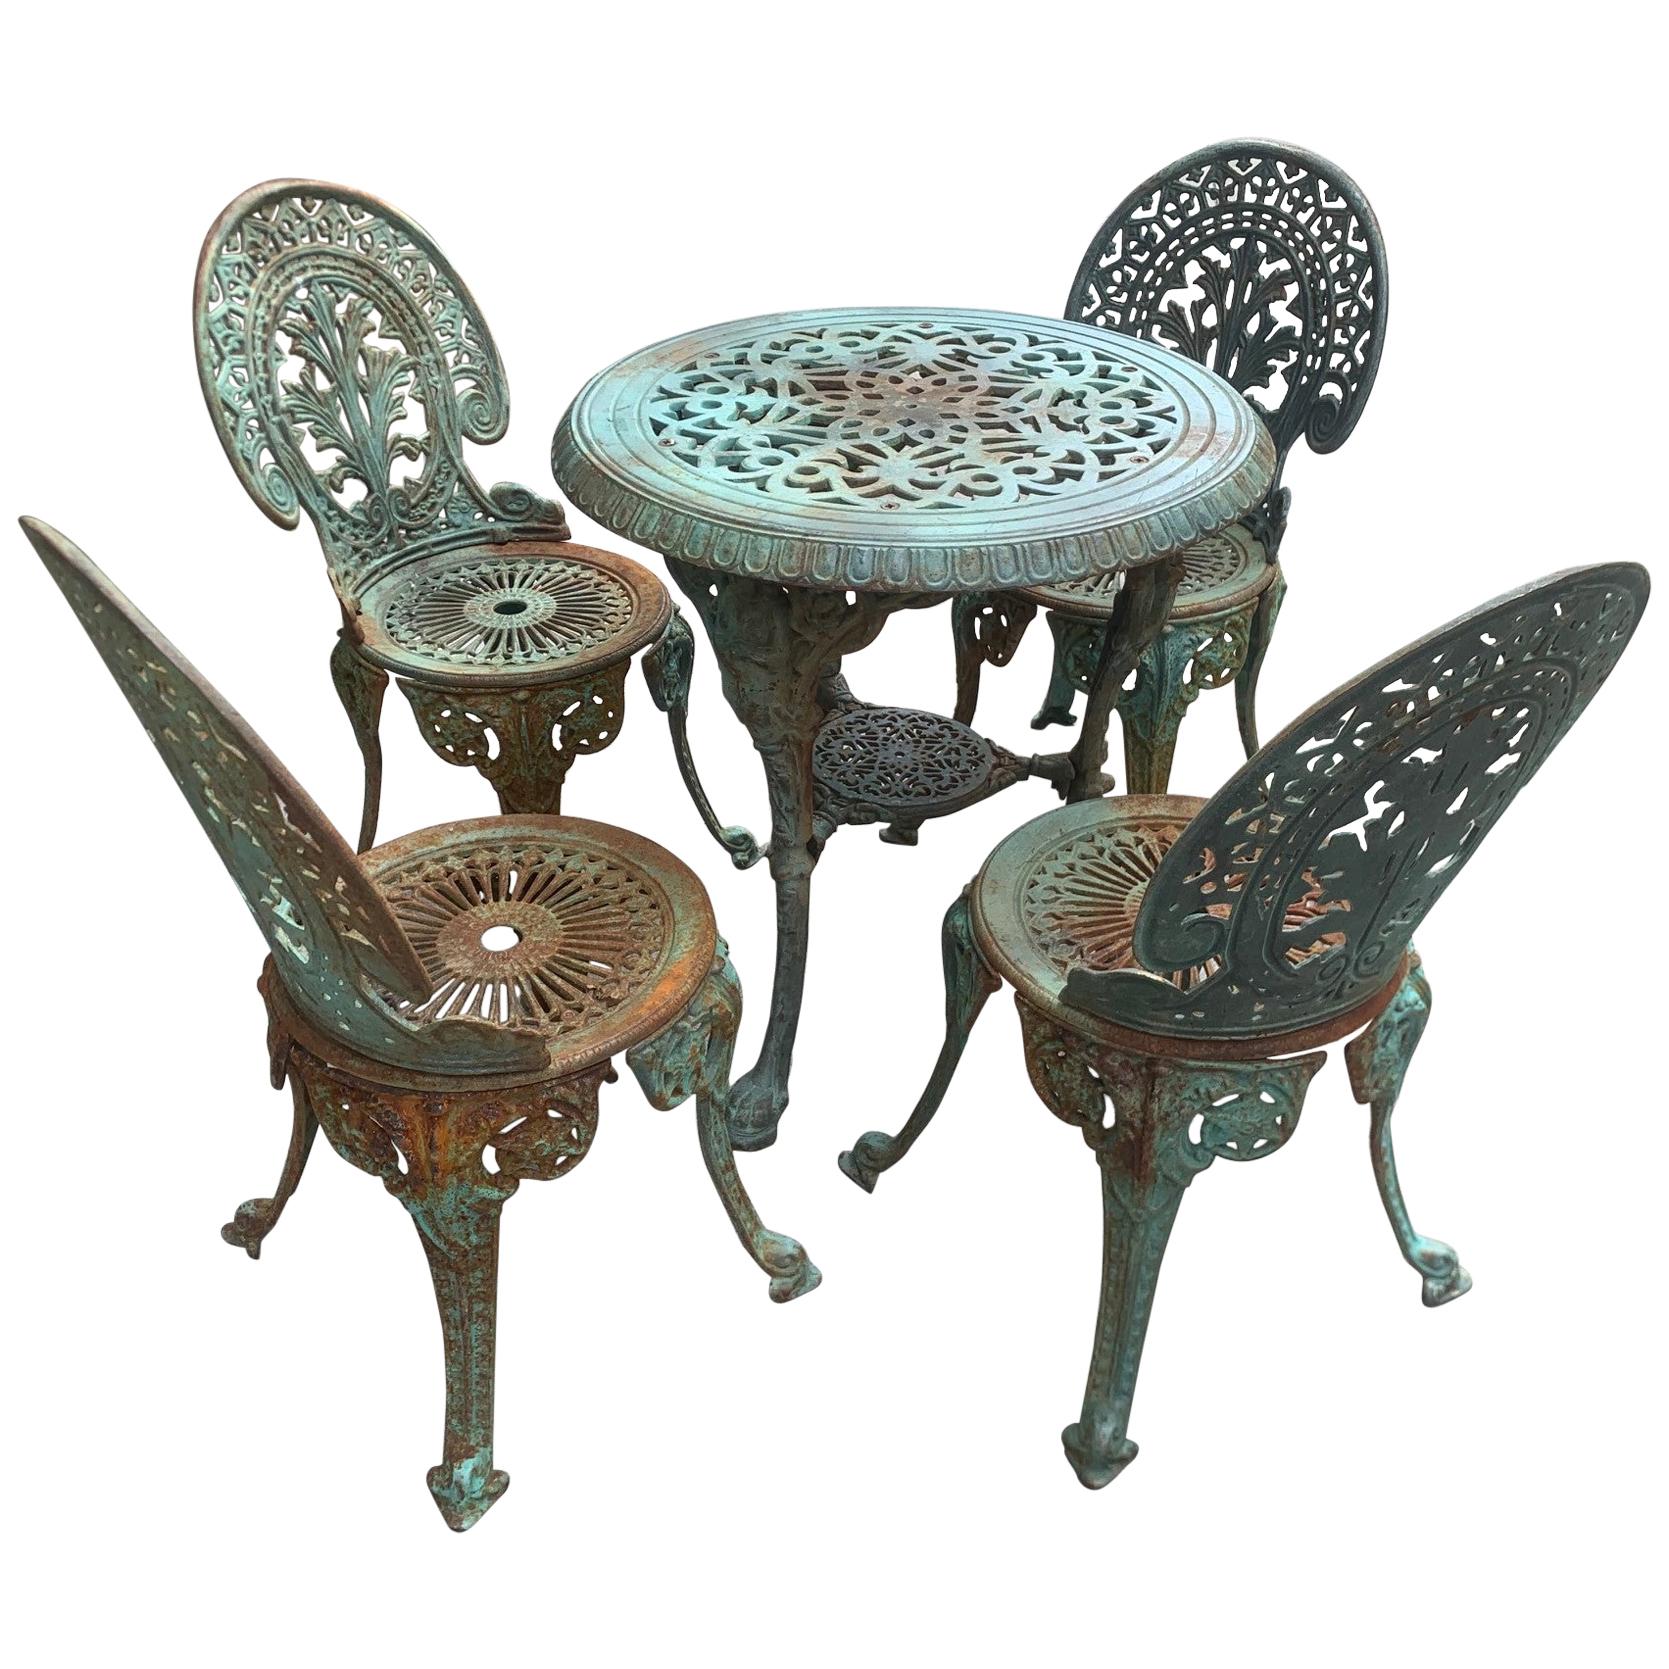 Cast Iron Outdoor Patio Set At 1stdibs, Wrought Iron Outdoor Furniture Antique